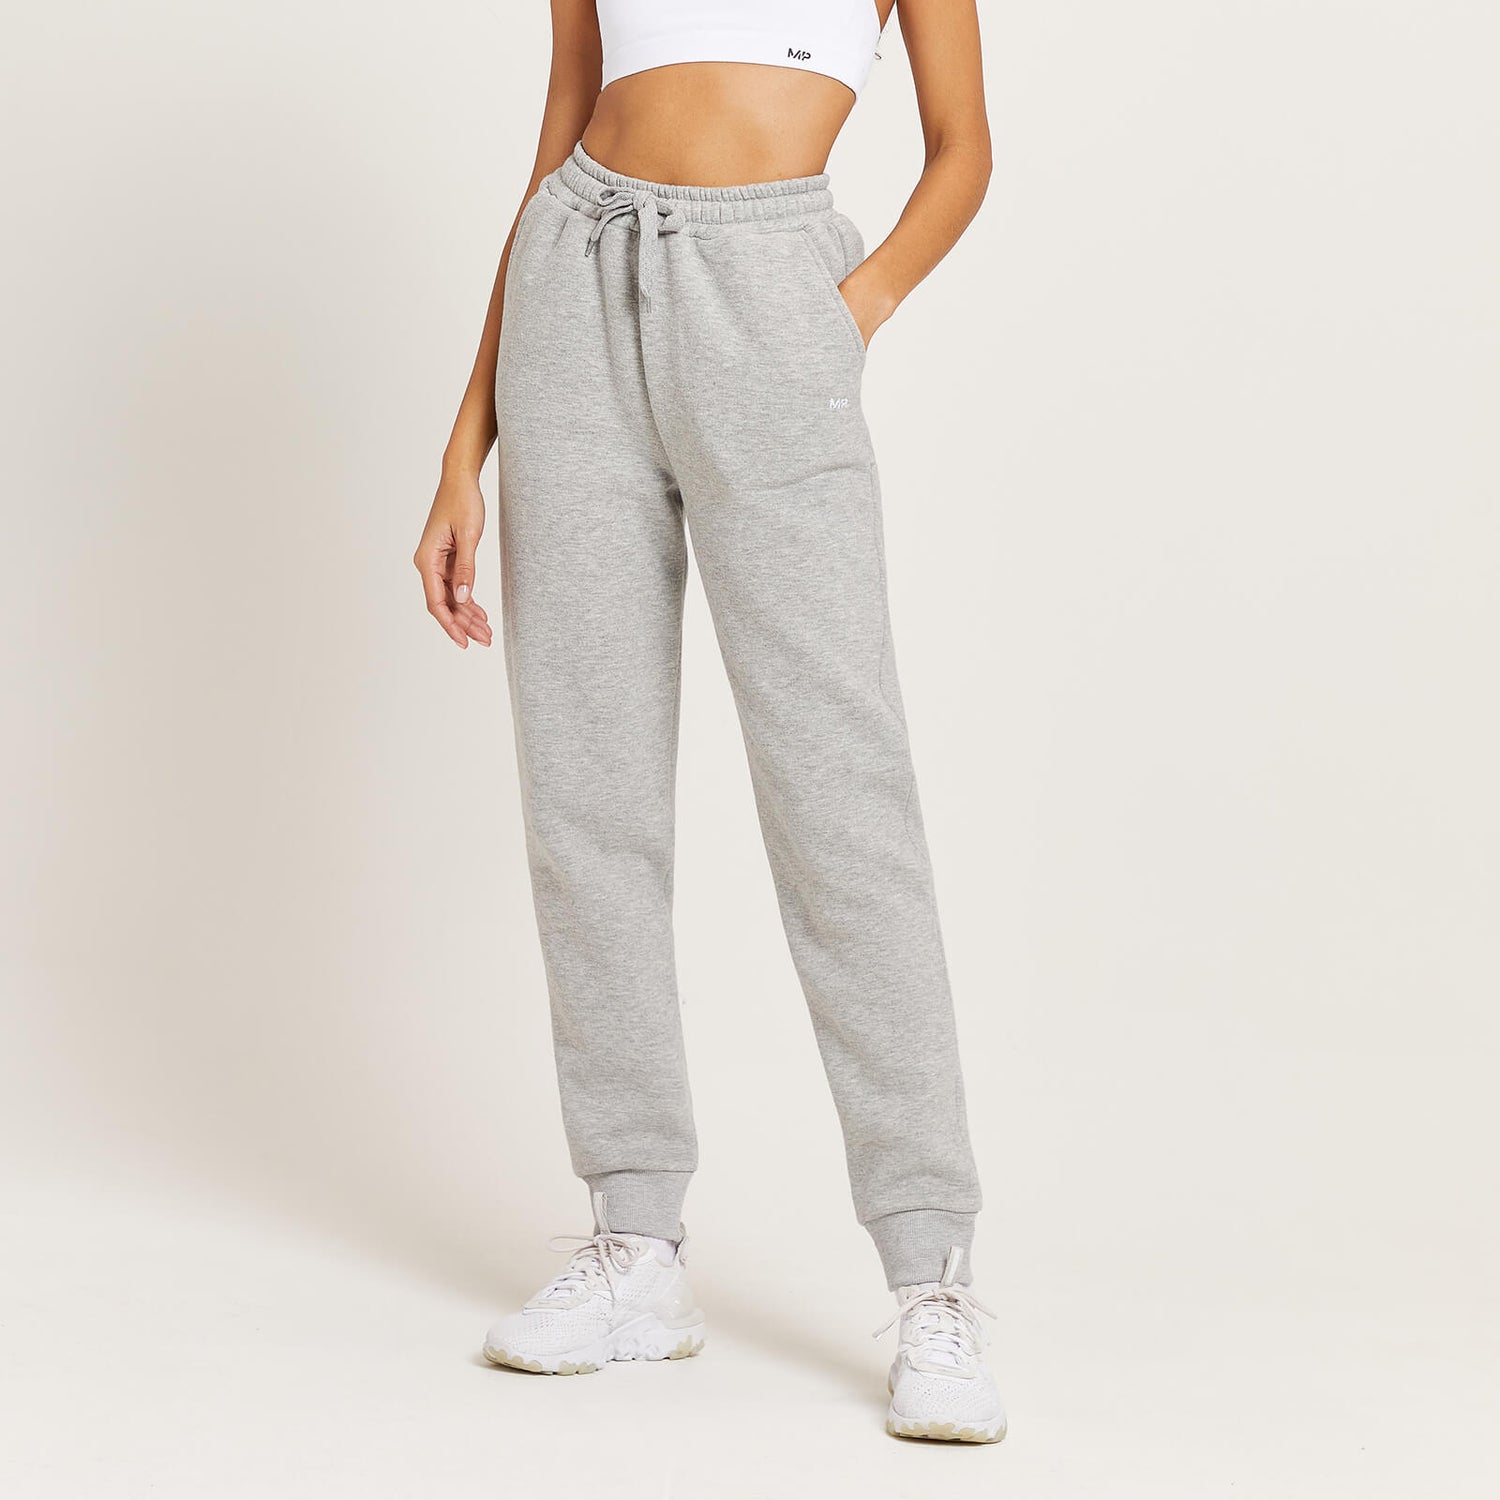 MP Women's Rest Day Relaxed Fit Joggers - Grey Marl - S